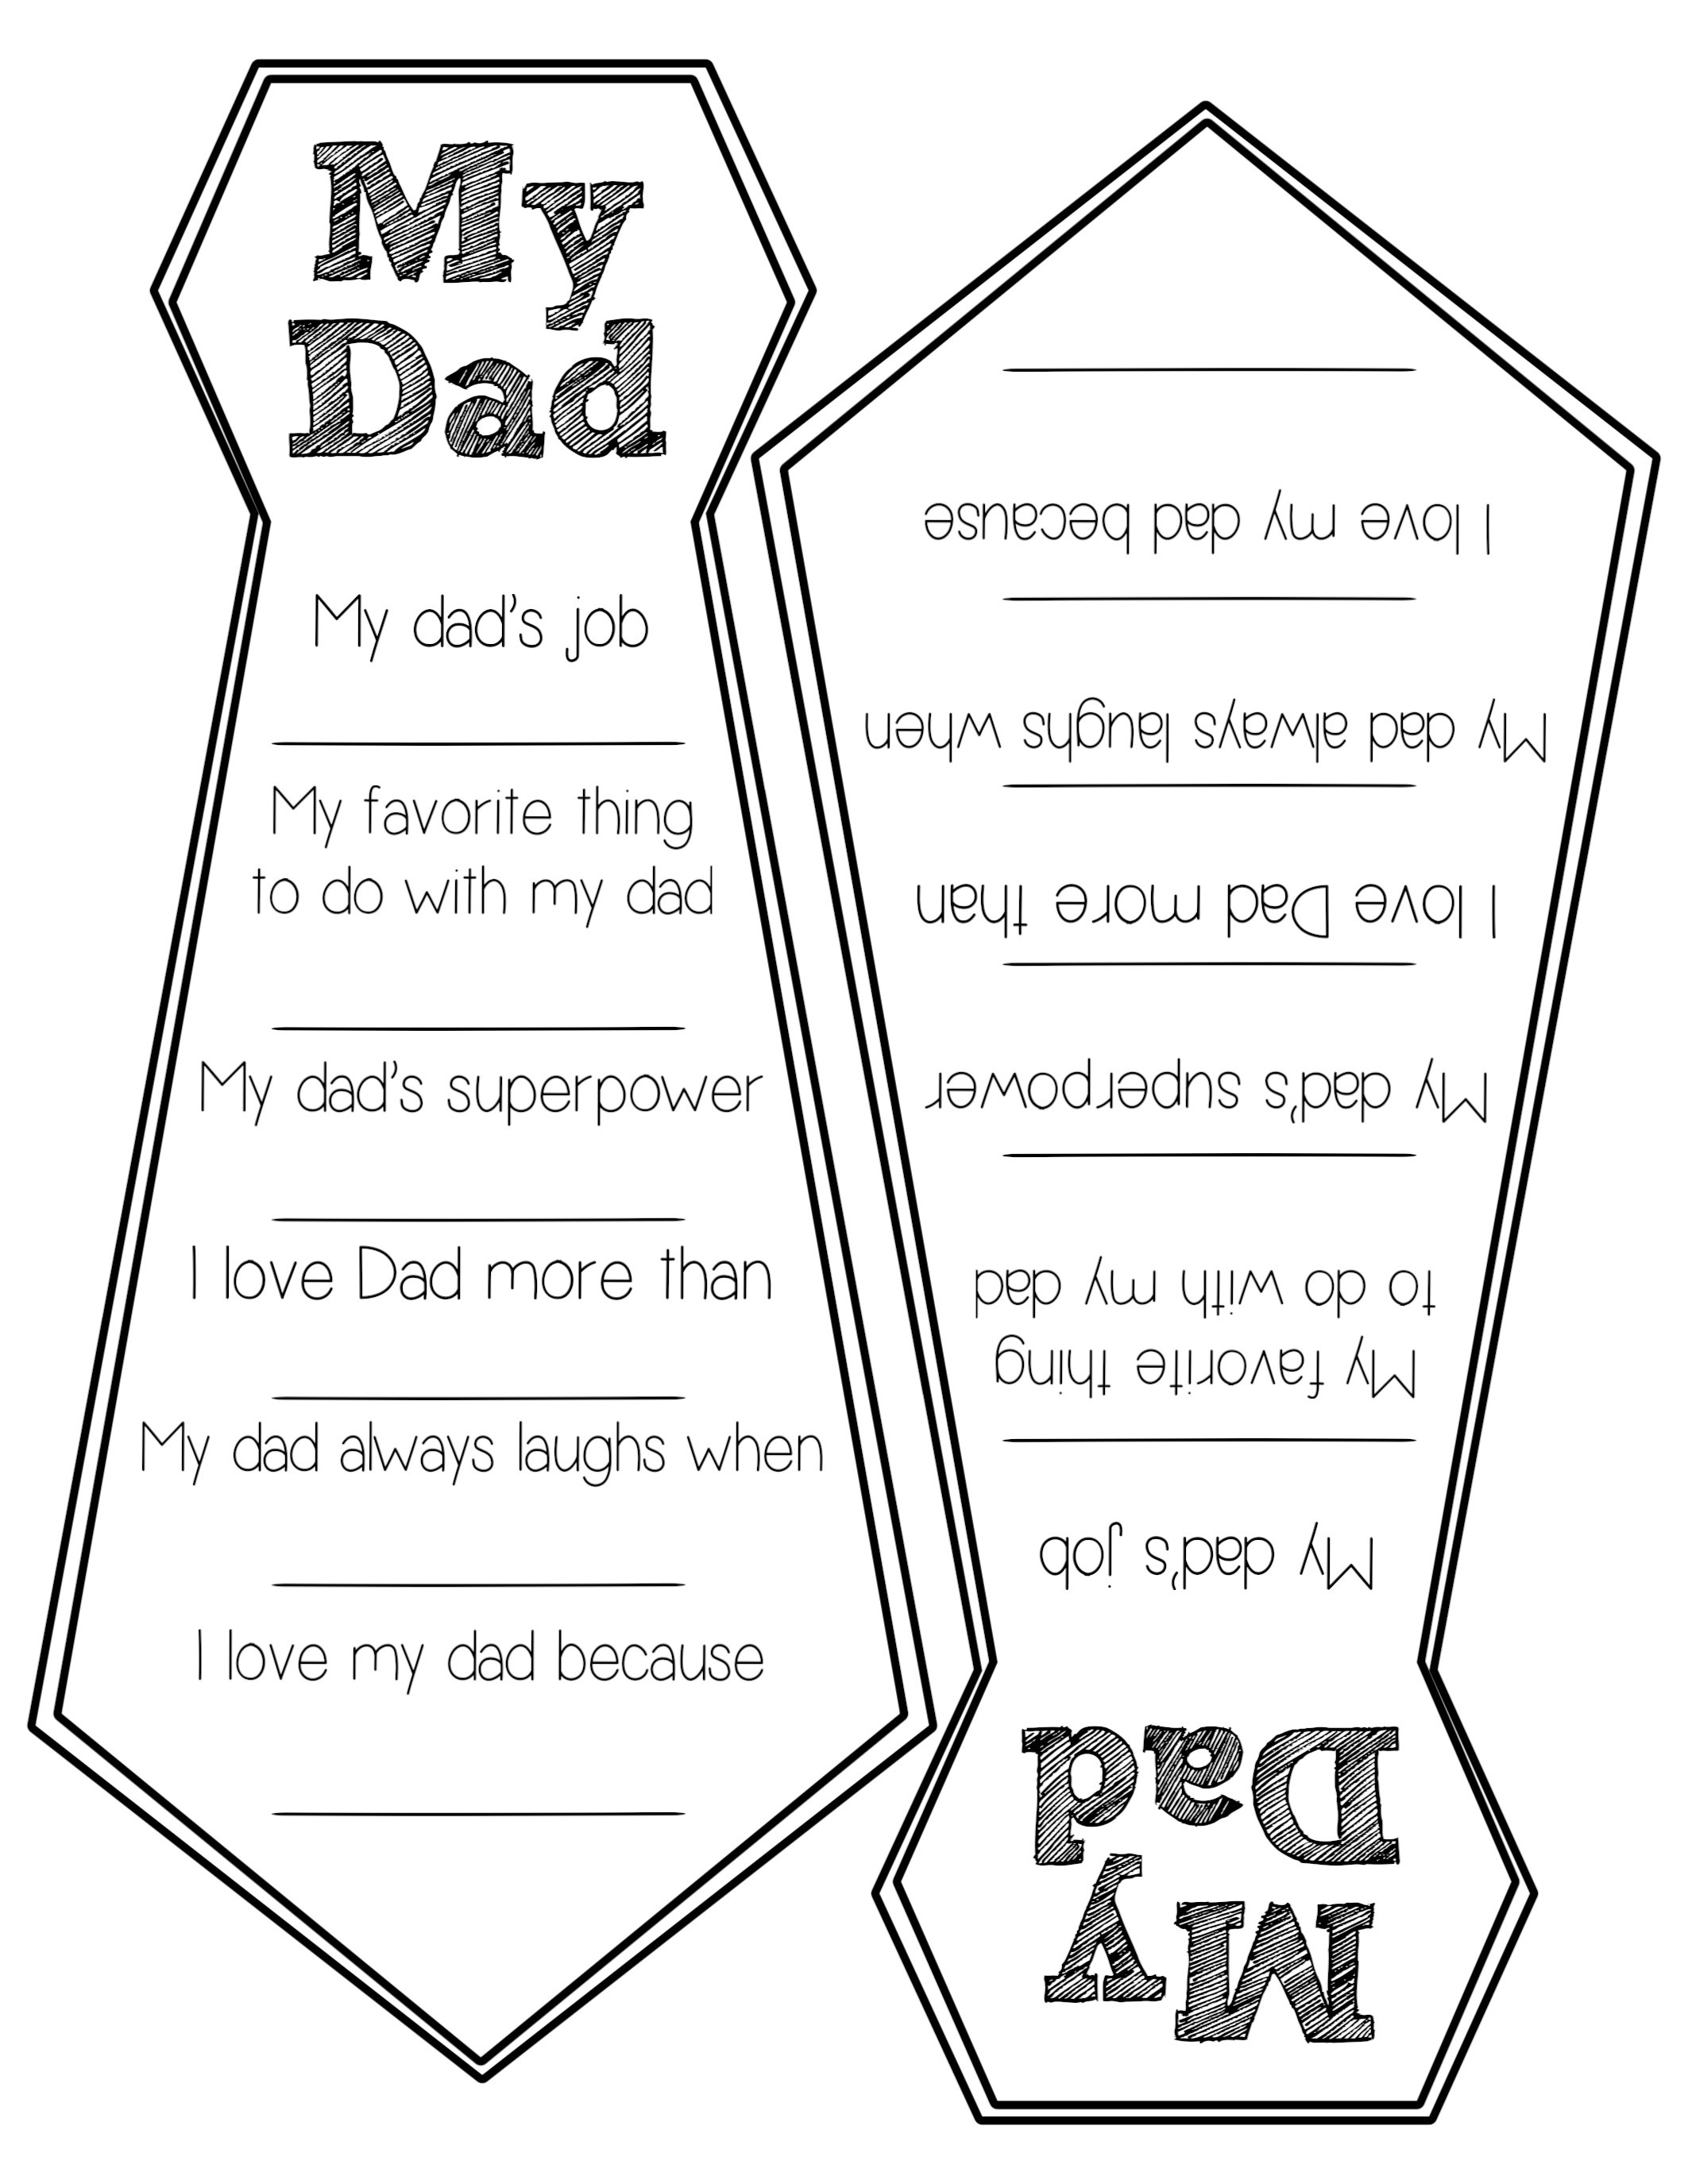 Free Printable Happy Fathers Day Grandpa Cards | Free ...